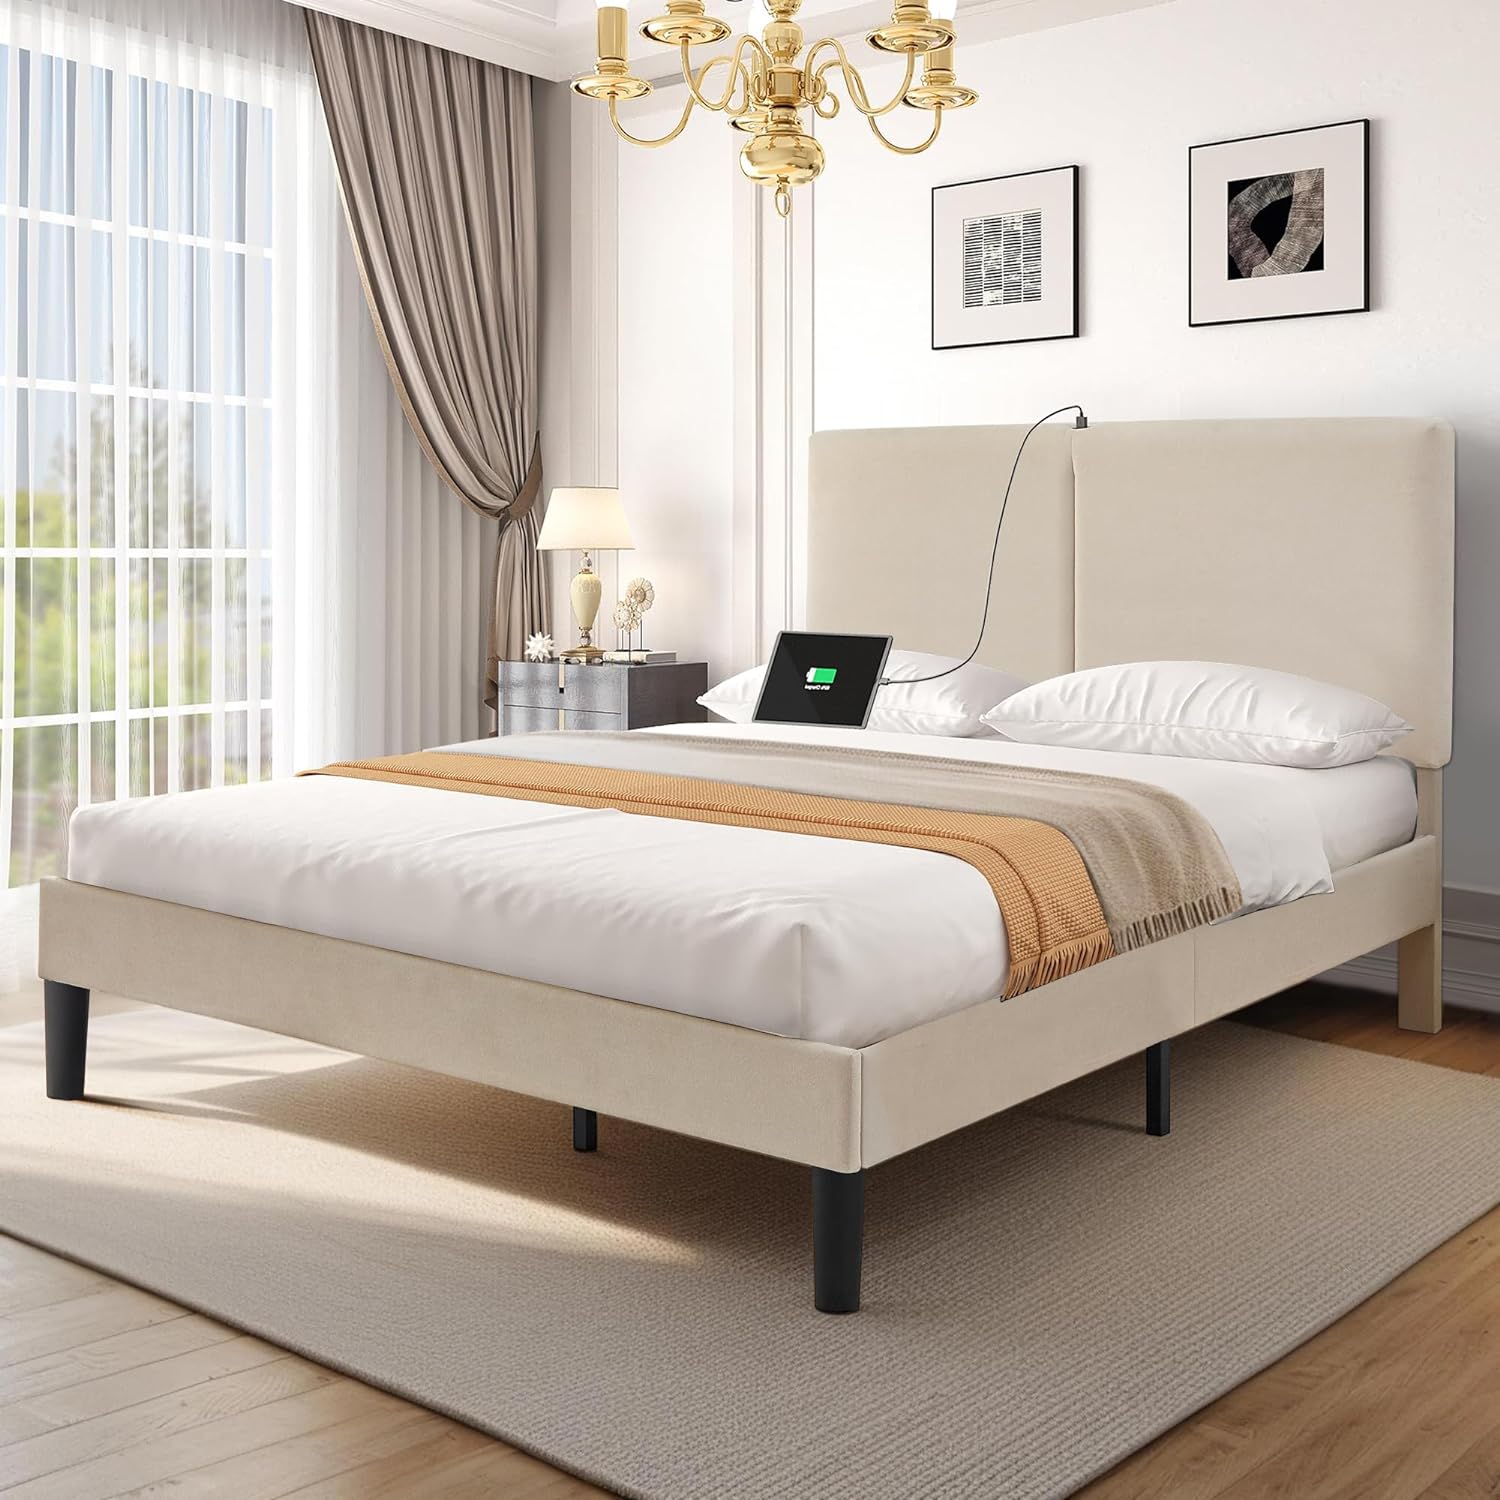 VECELO Twin/Full/Queen Bed Frame Upholstered Platform with Type-C & USB Ports Height-Adjustable Cotton and Linen Headboard